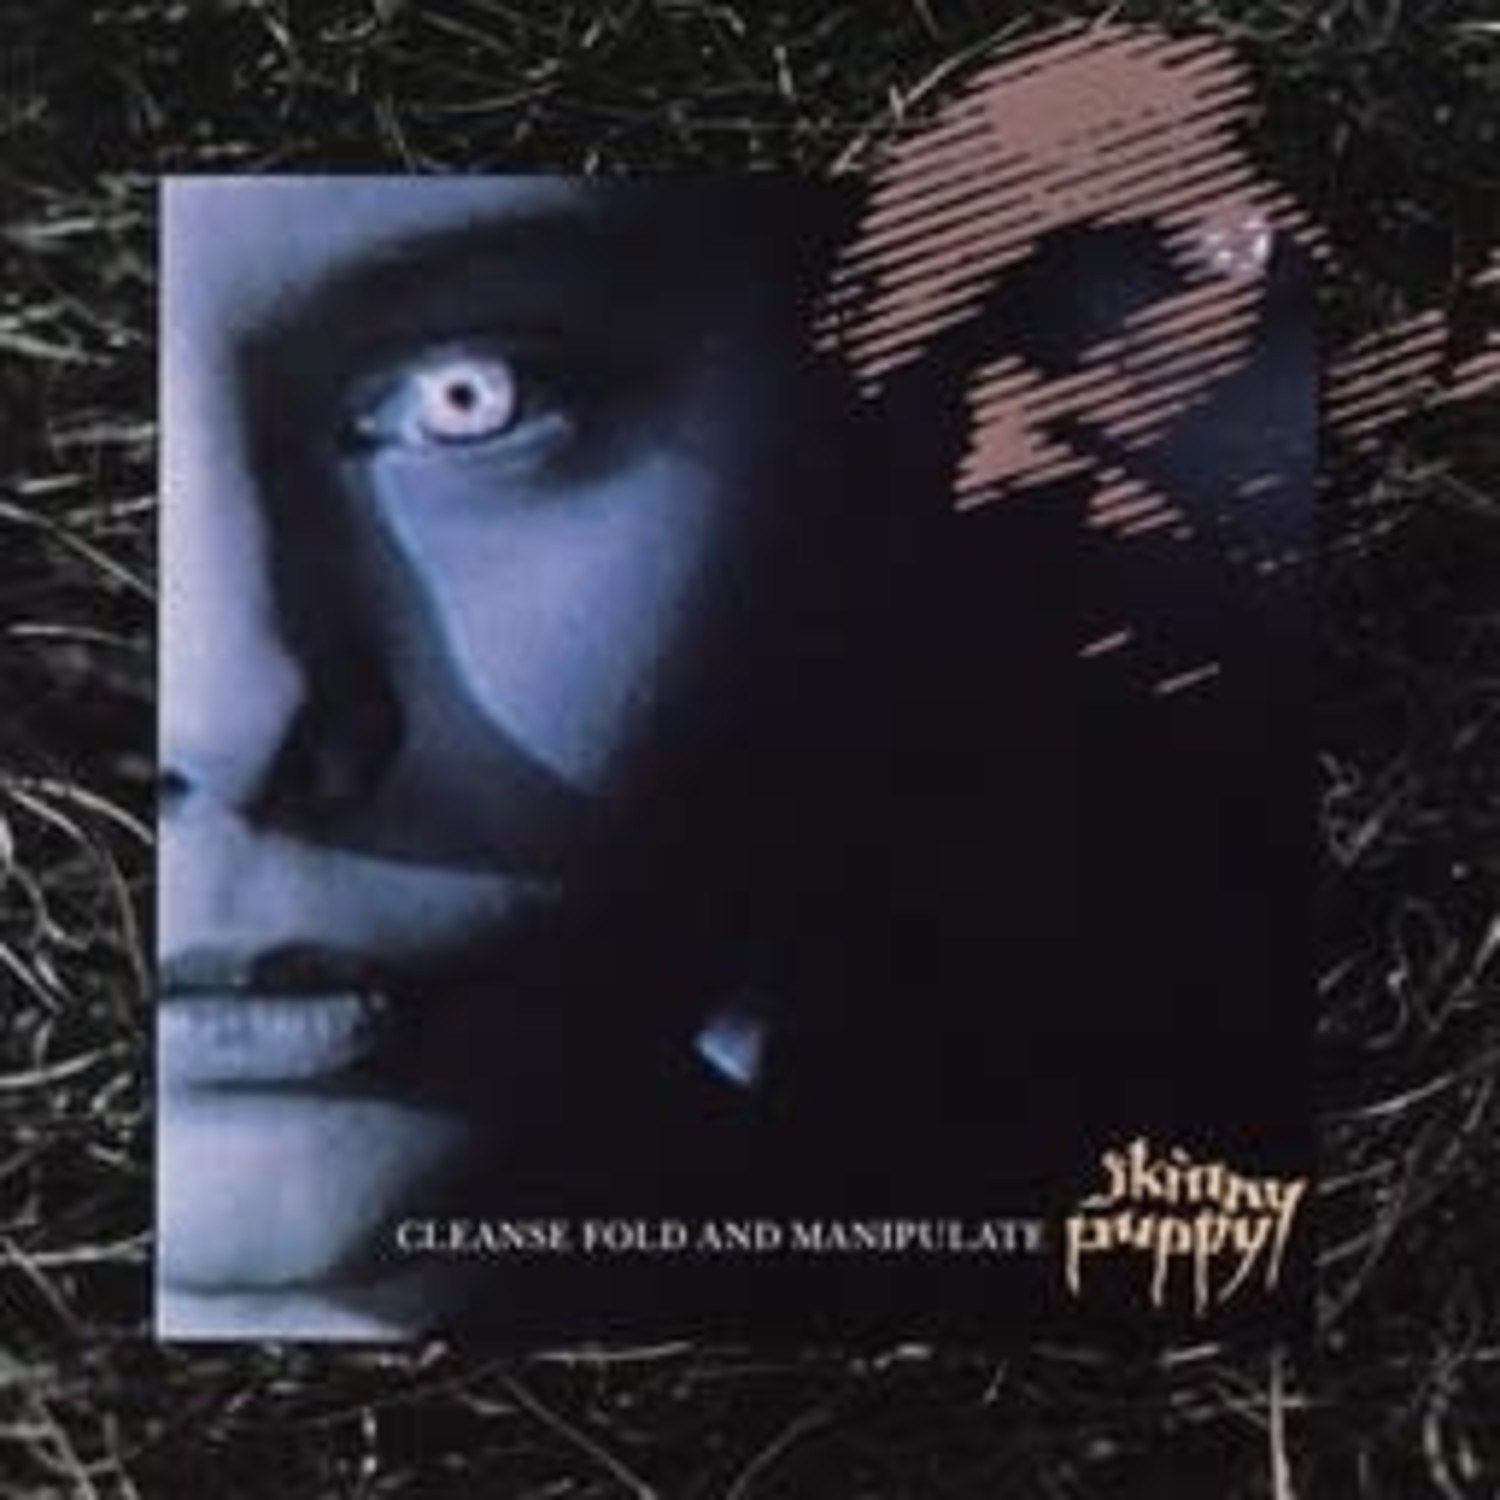 All the Air In My Lungs: Skinny Puppy - Remission - 1984